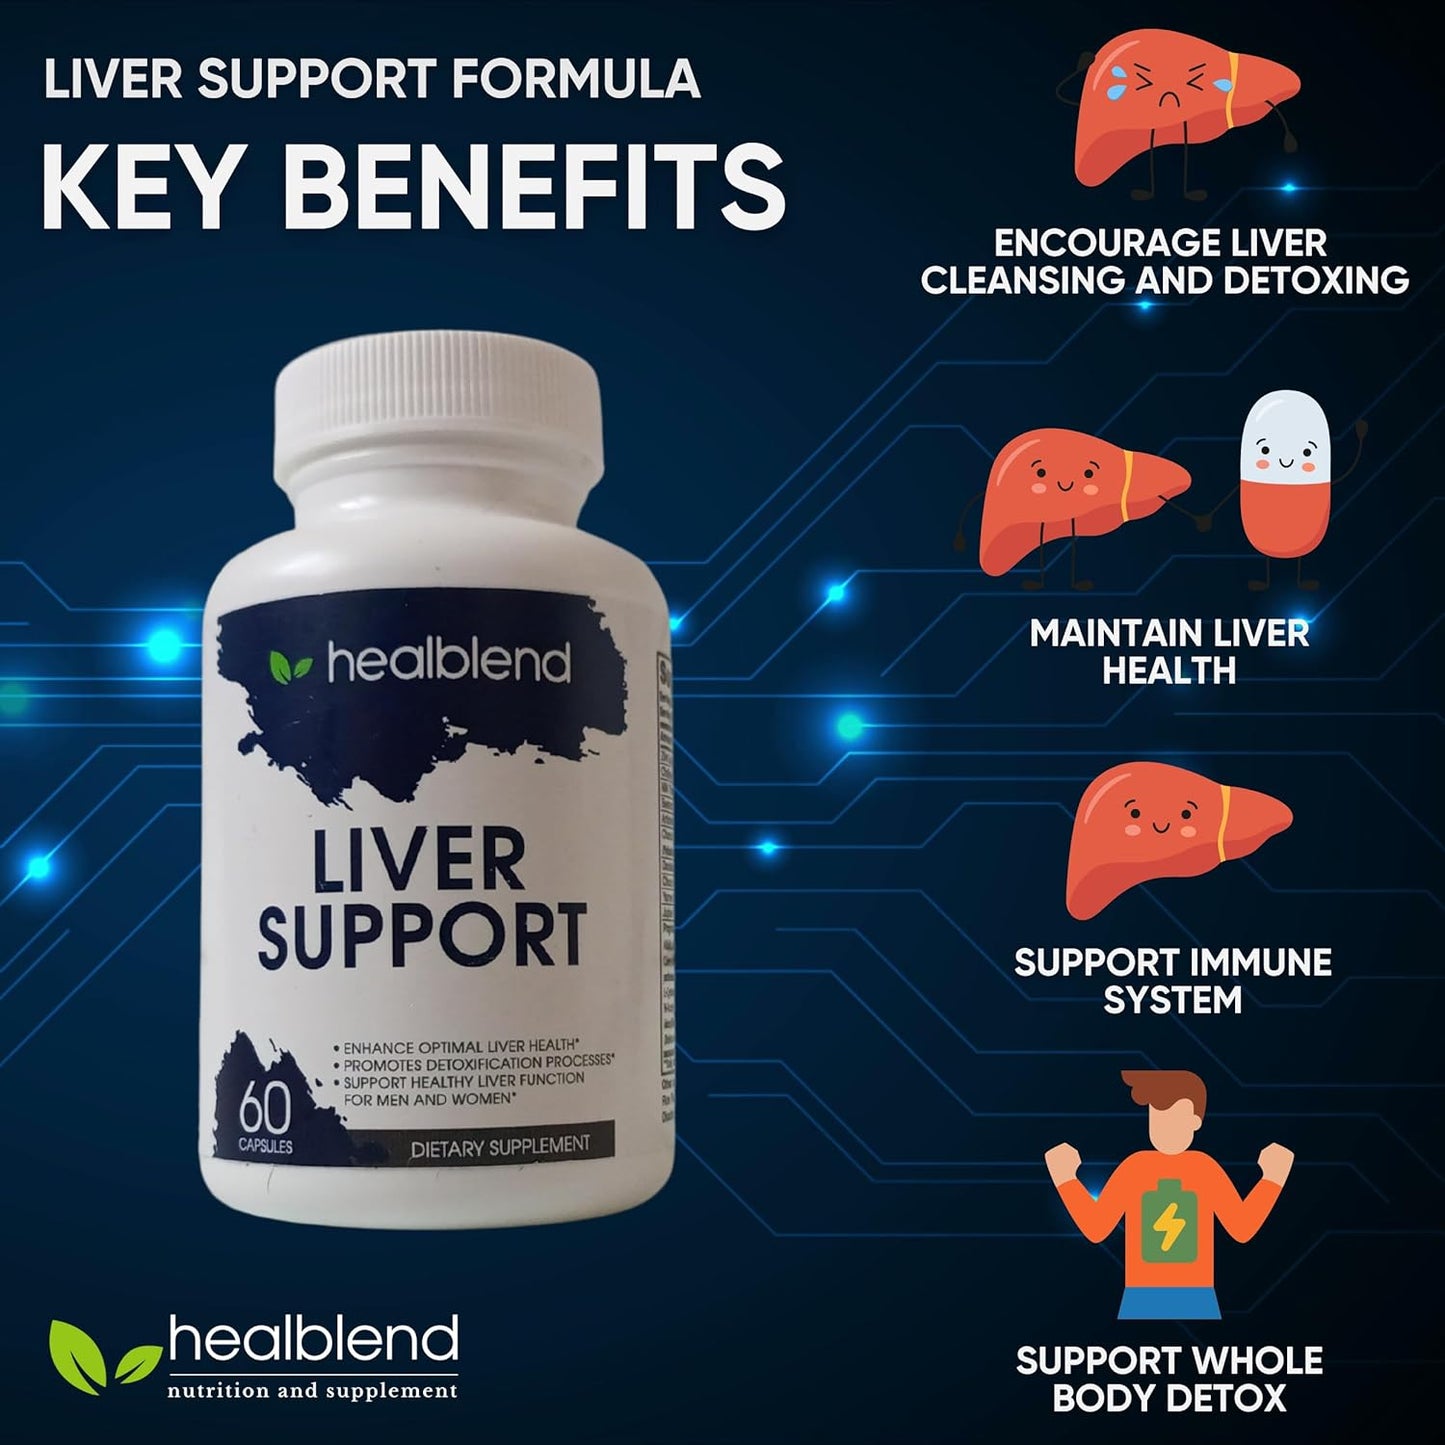 Liver Support with Milk Thistle Extract